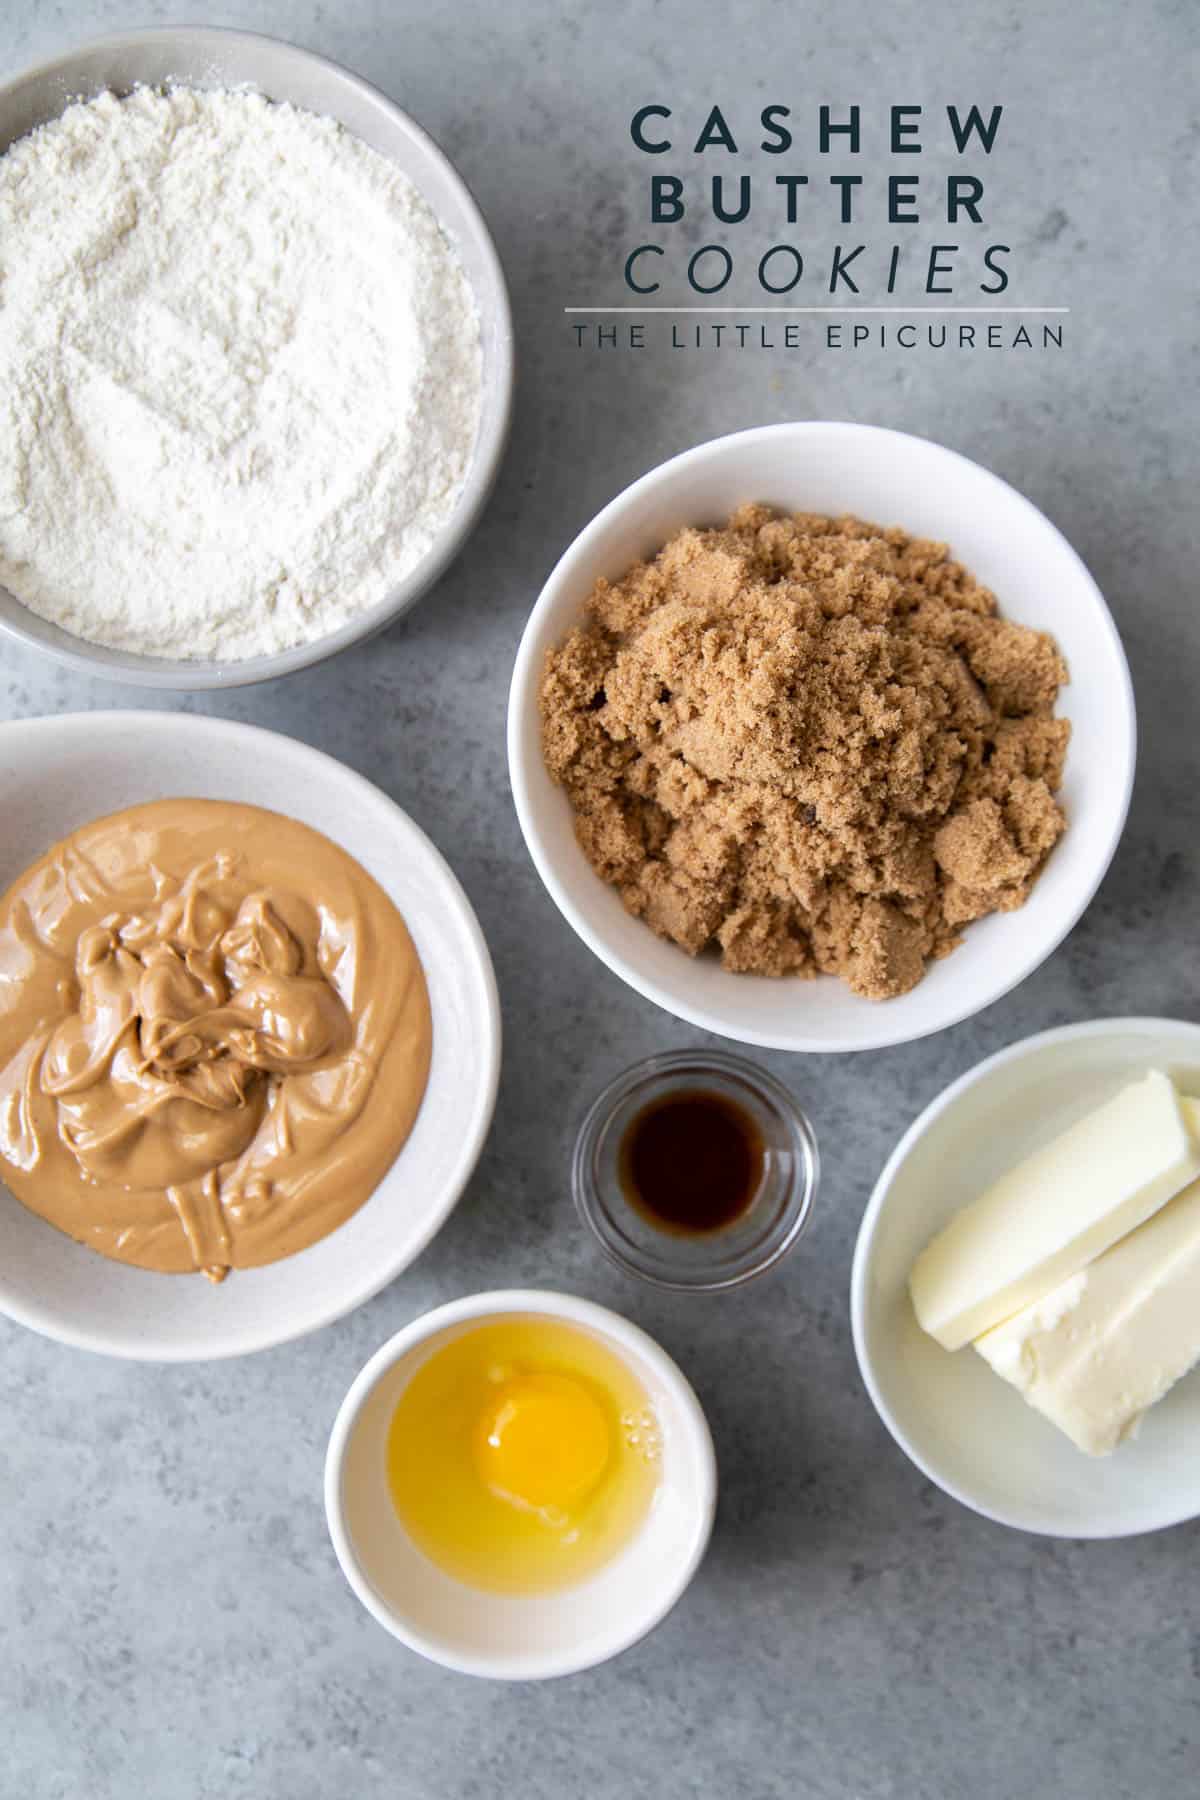 ingredients for cashew cookies including cashew butter